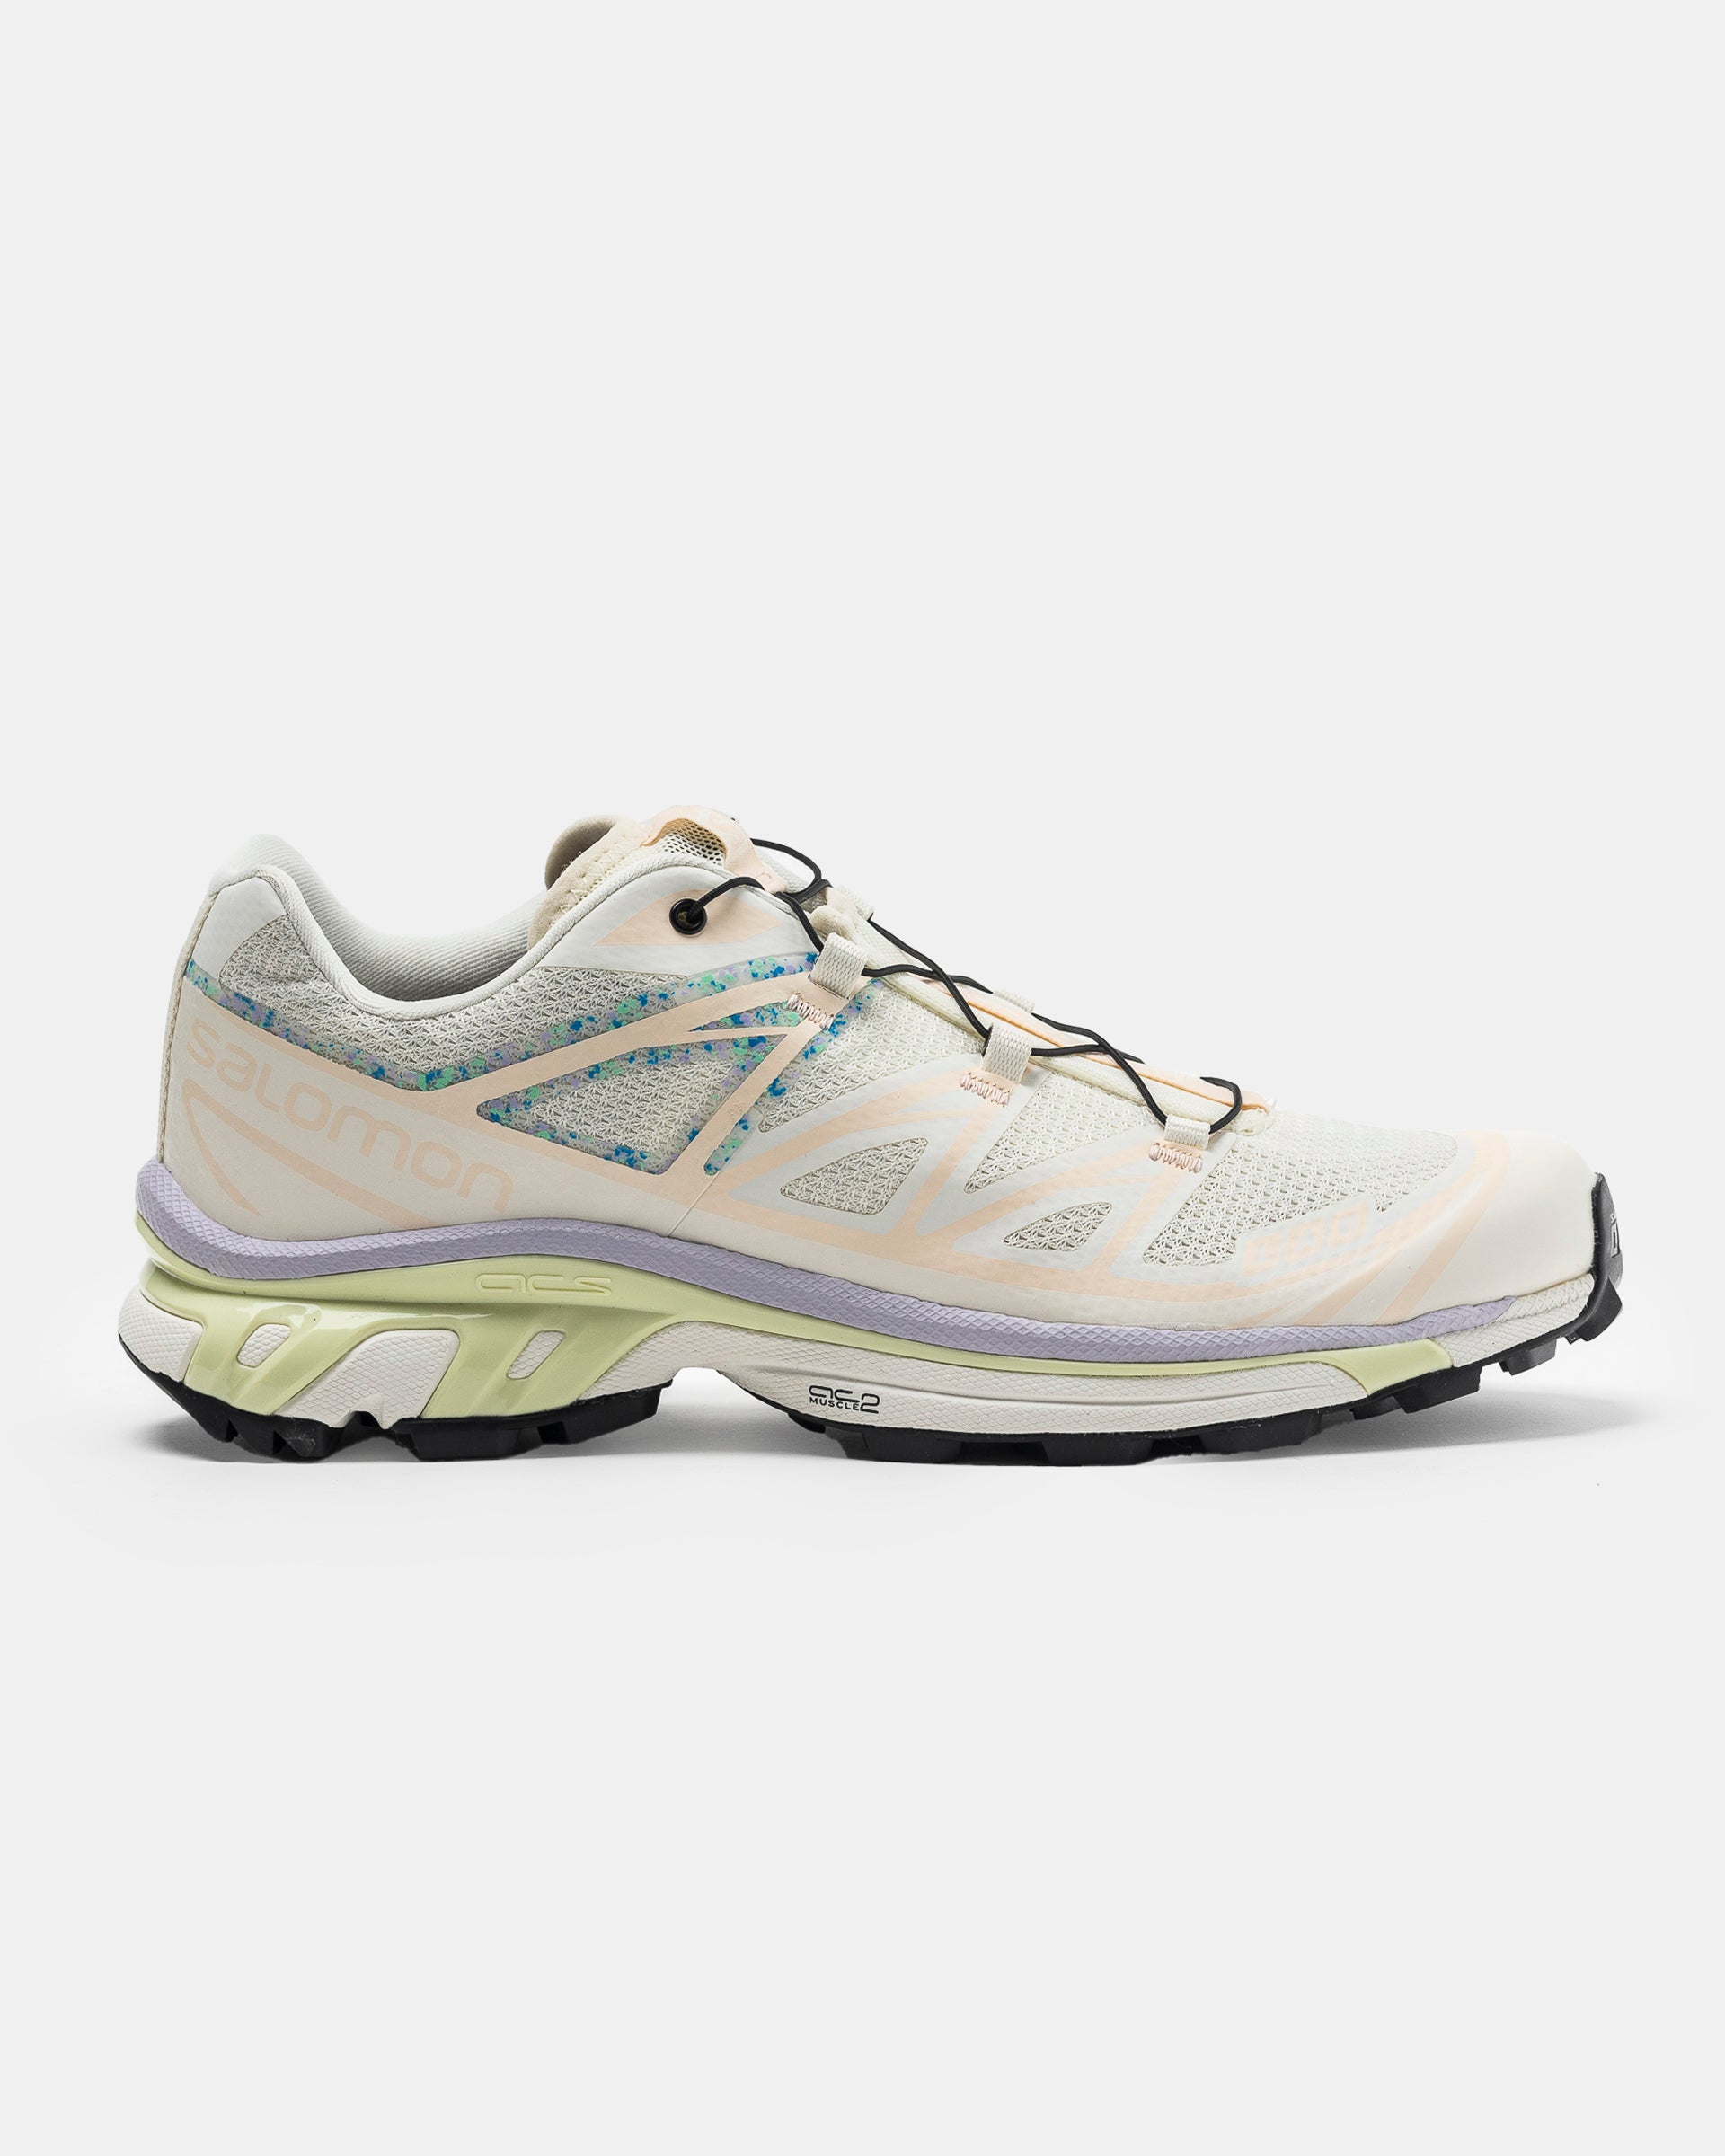 Salomon XT-6 Mindful in Vanilla, Cloud Pink, and Orchid Petal on the white background.